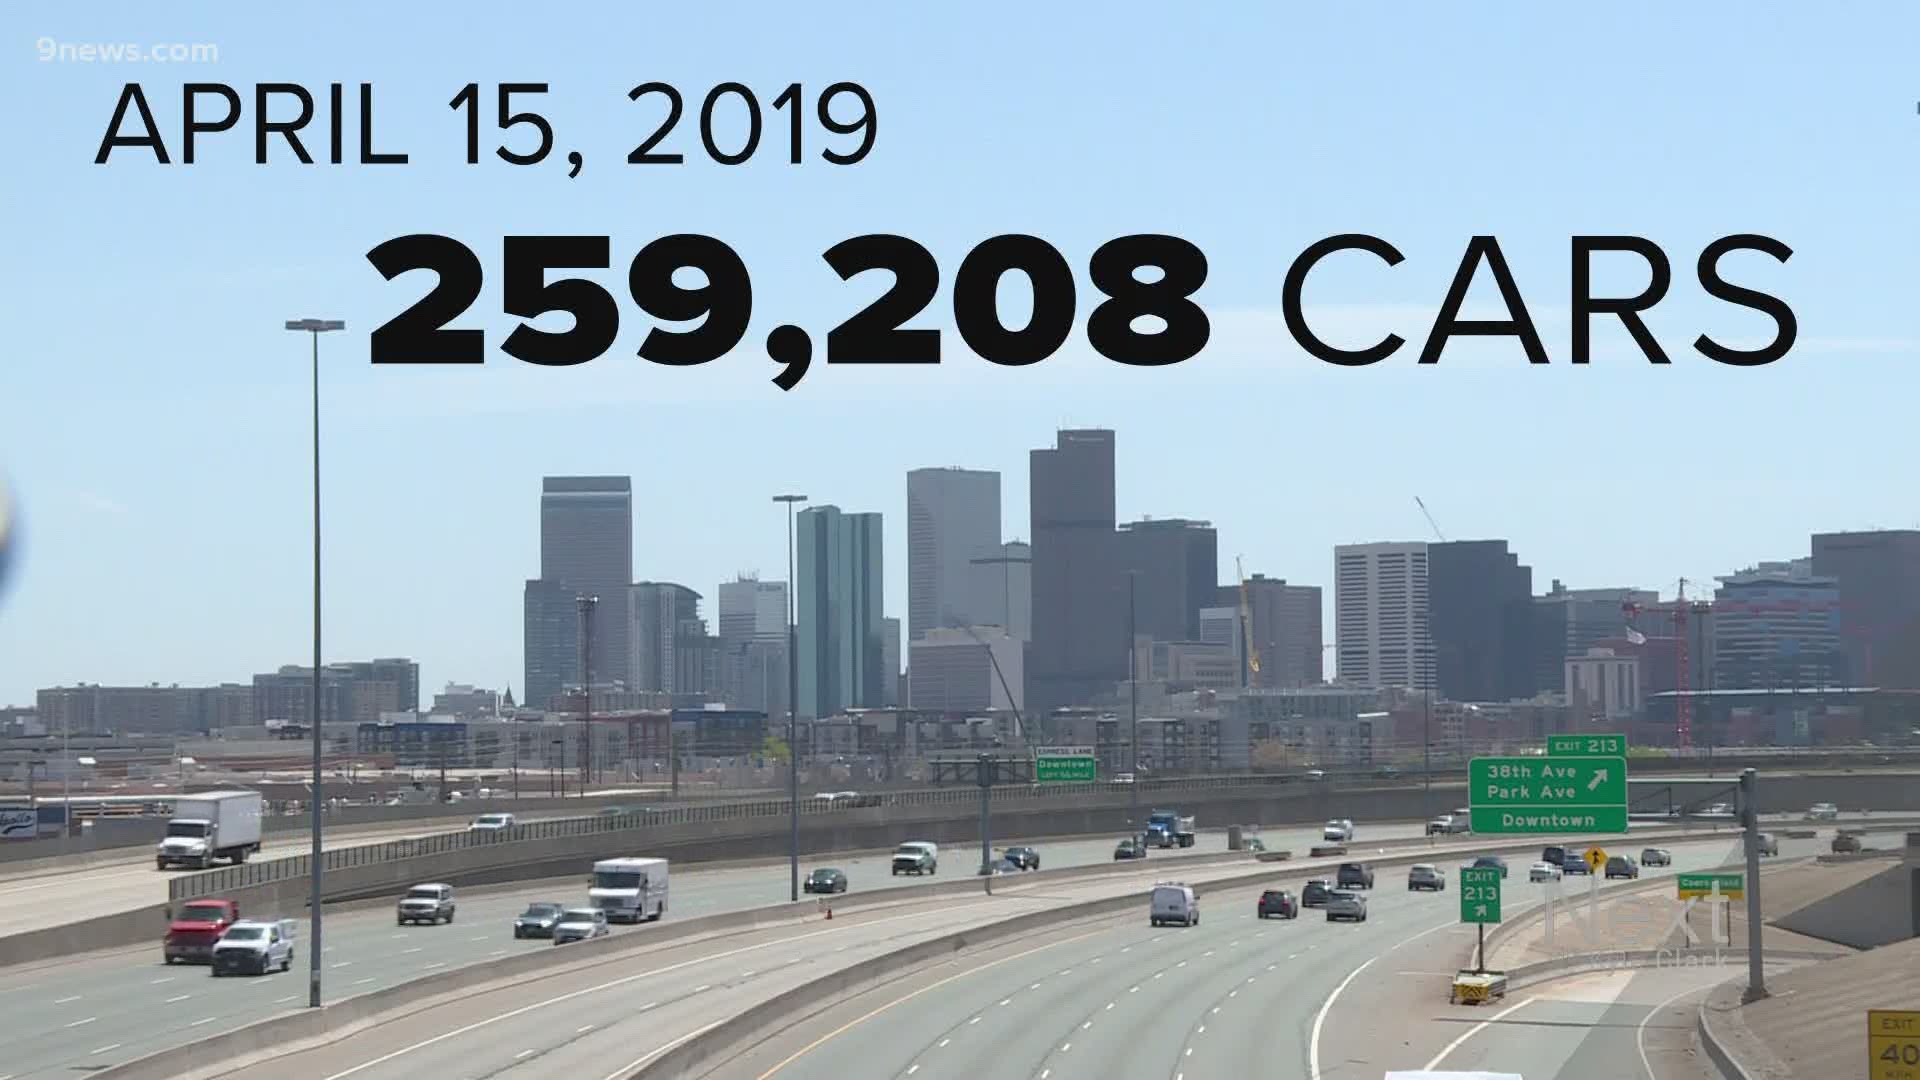 In early April, the Colorado Department of Transportation said traffic was down about 50% from pre-COVID-19 times. In May, traffic increased by 20%.